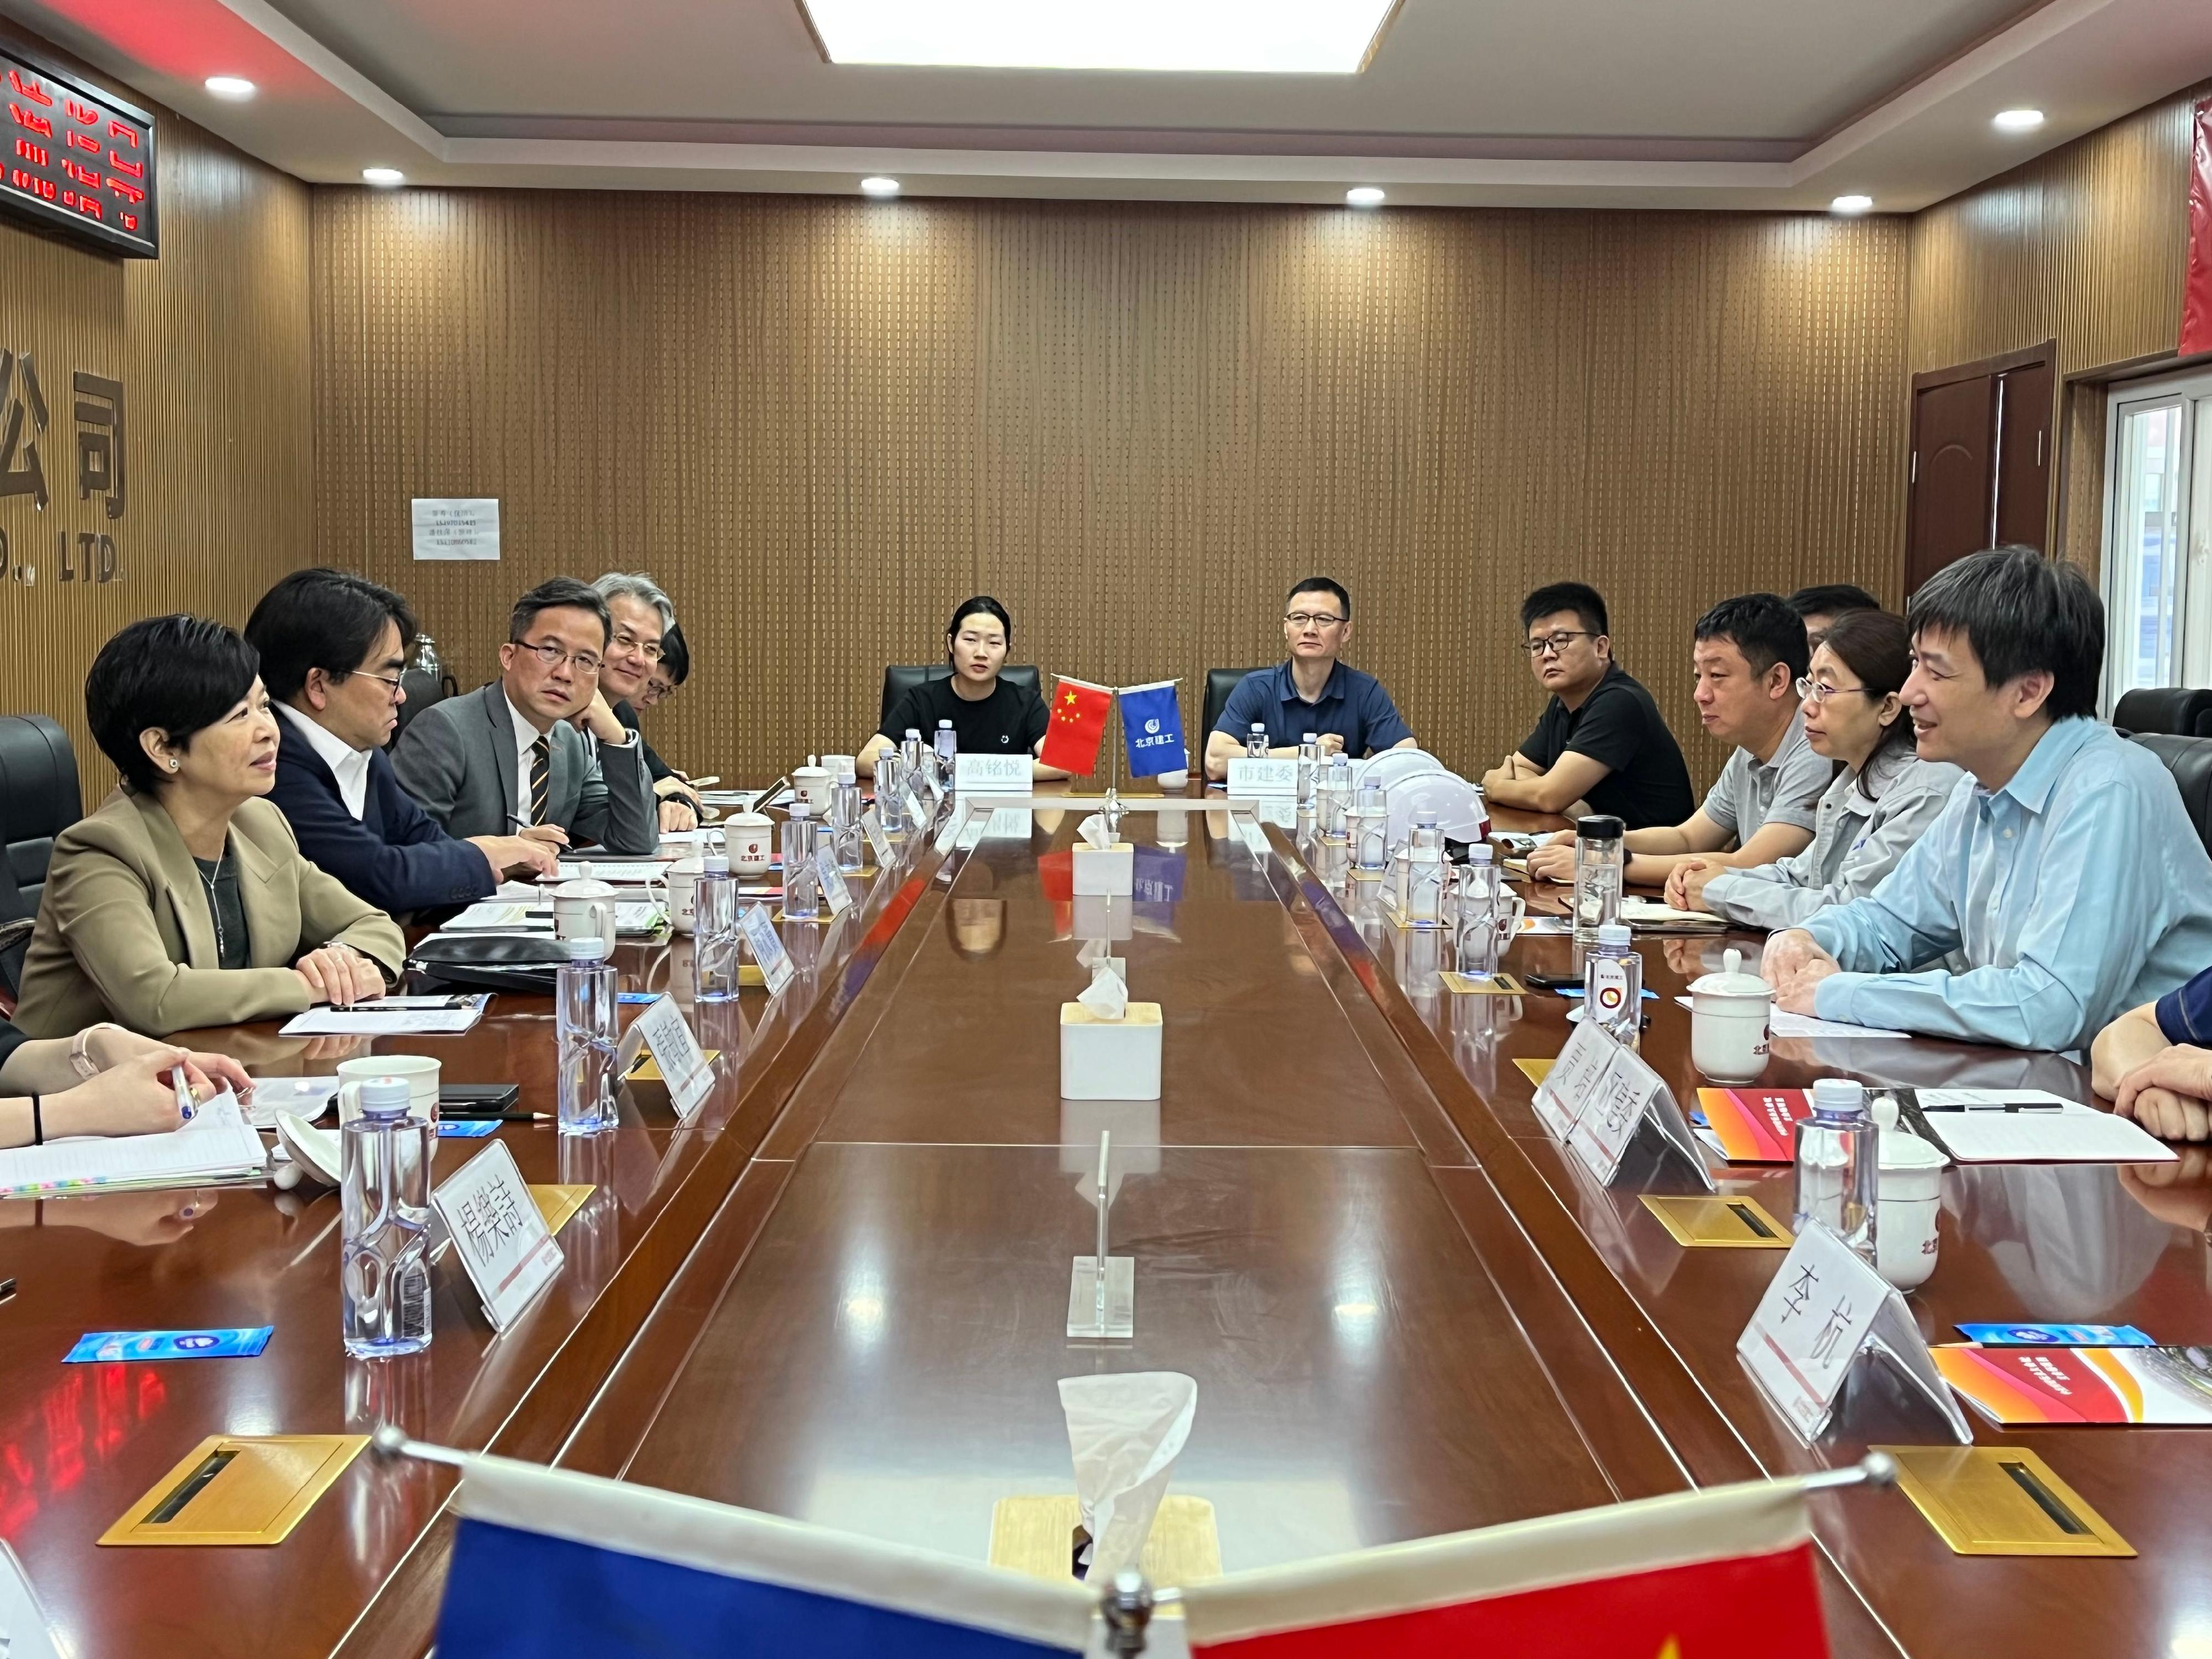 The Secretary for Housing, Ms Winnie Ho, was on the second day of her visit to Beijing today (May 31), visiting the construction project for the permanent venue of the Zhongguancun Forum. Photo shows Ms Ho (first left) exchanging views with the project representatives to learn about the adoption of Building Information Modelling, robotic technology and smart construction sites.